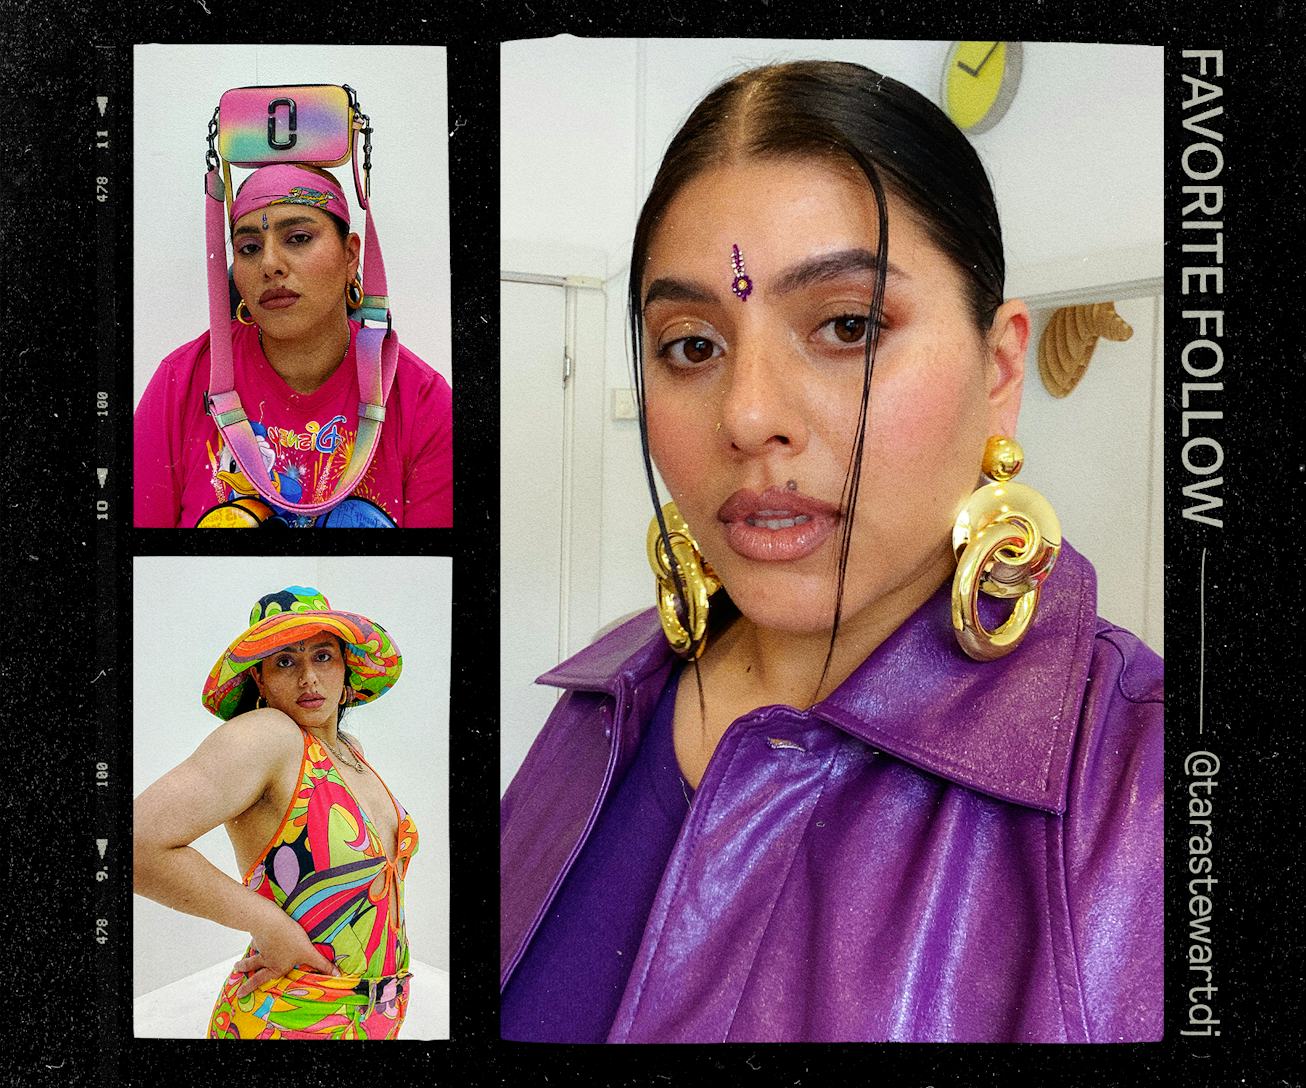 Three photos of the DJ Tara Stewart in mixed streetwear and traditional Indian clothing.